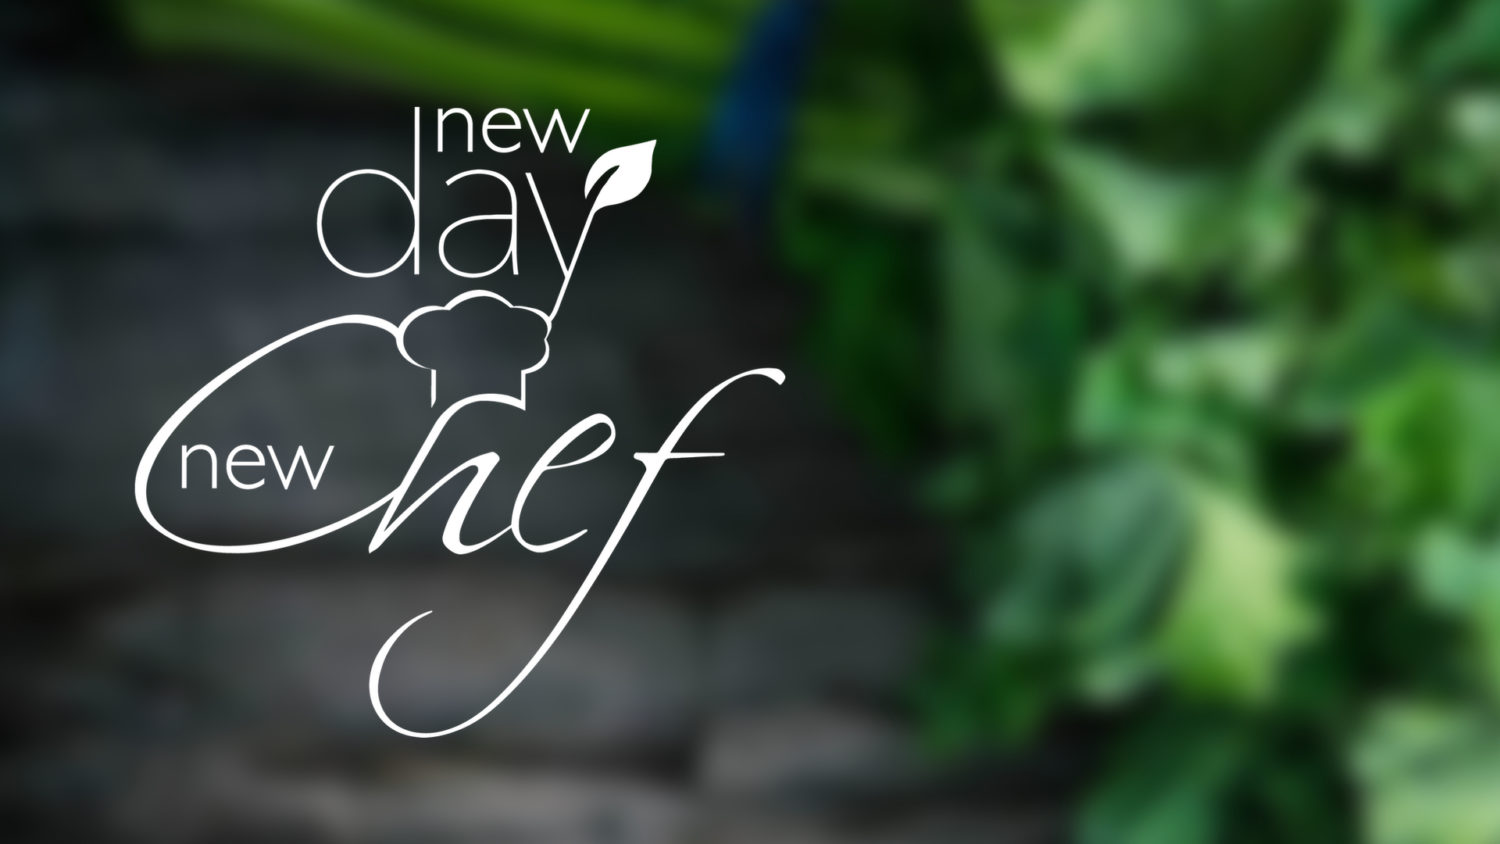 Logo of New Day New Chef